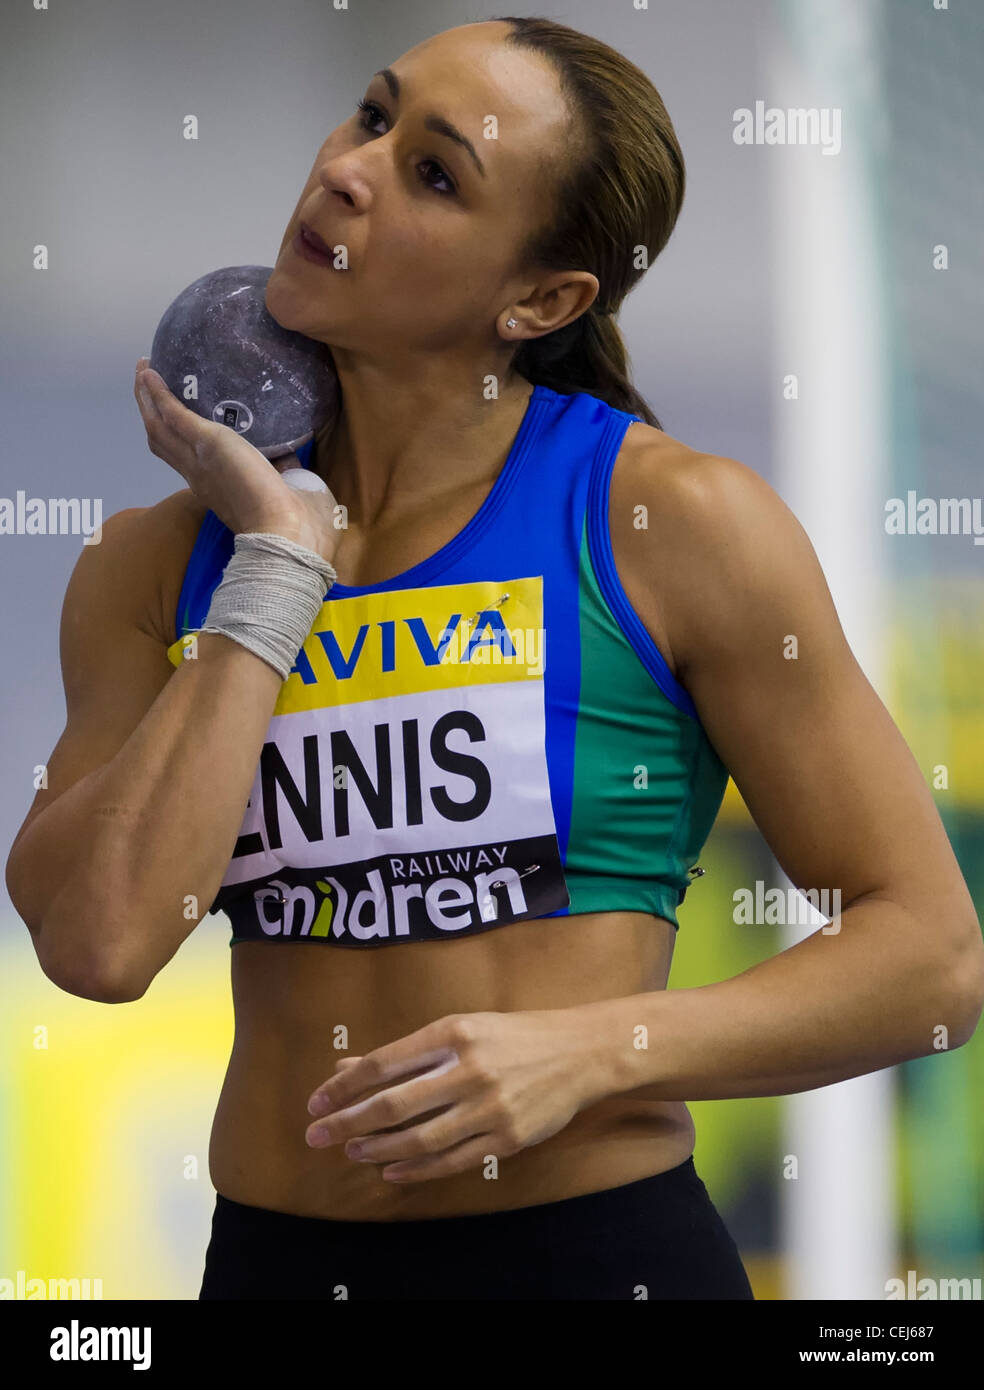 Jessica Ennis during the women's shot put final at the Aviva Indoor UK Trials and Championships Stock Photo